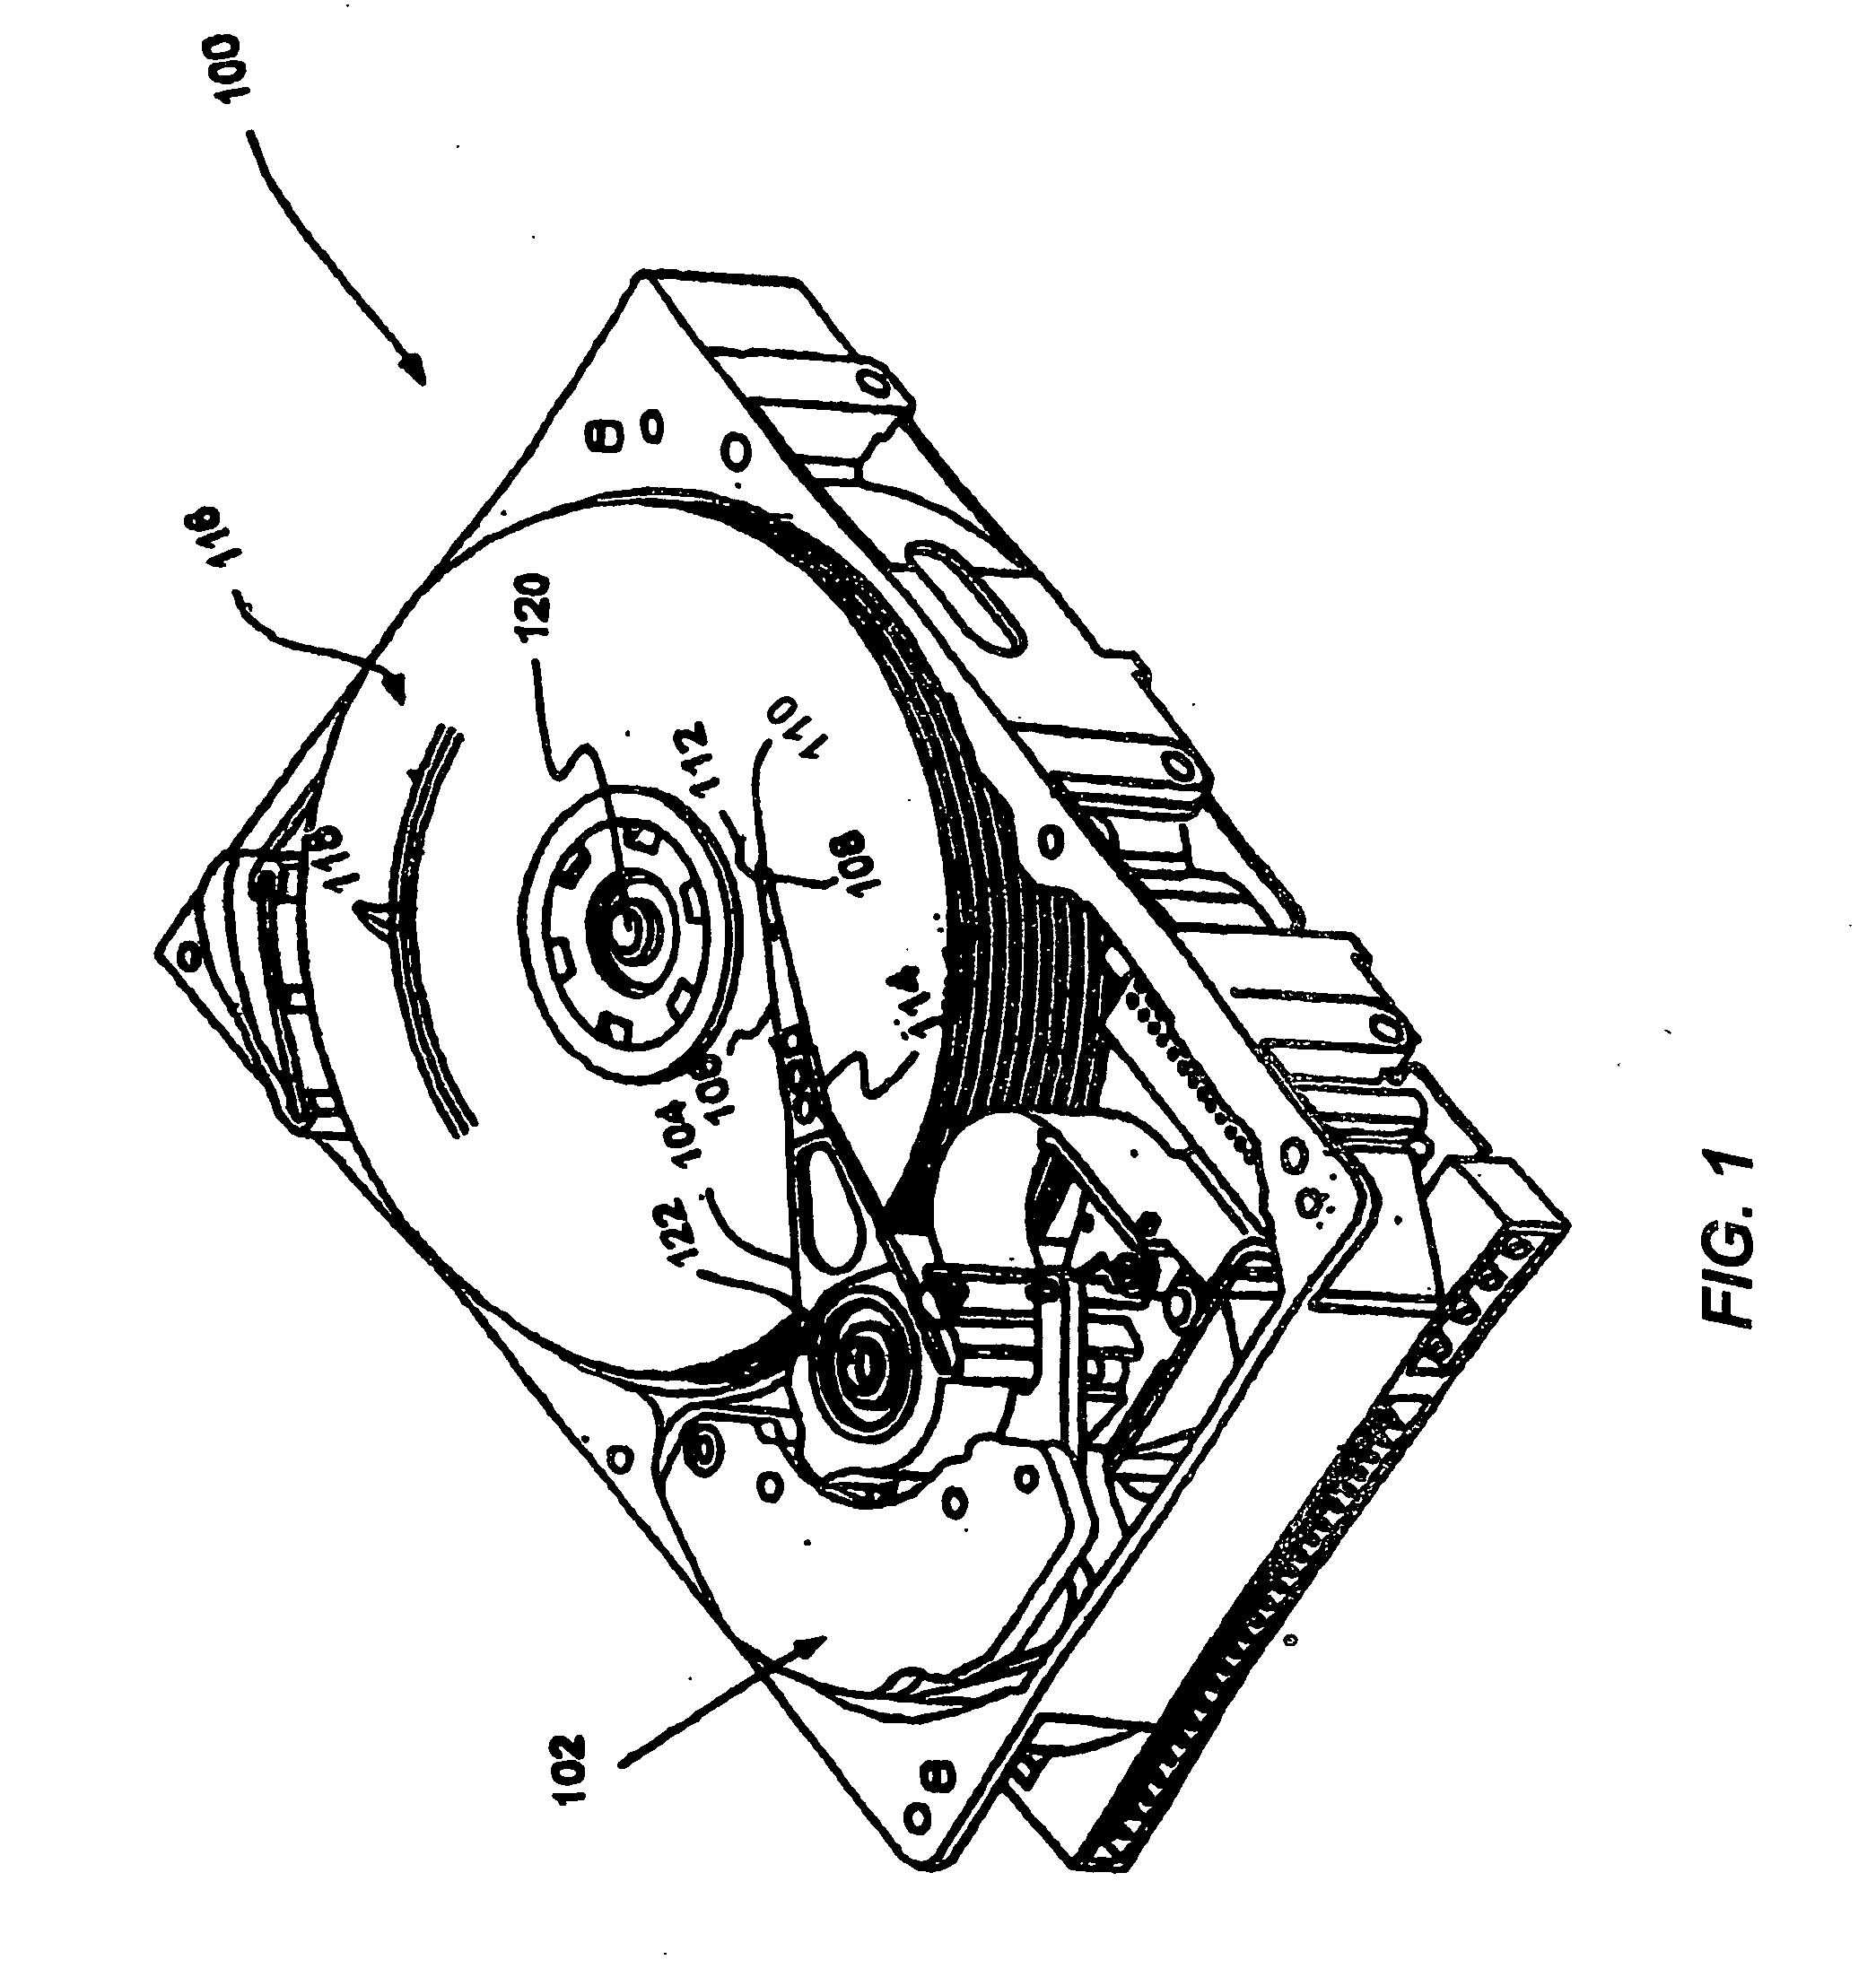 Perpendicular head with self-aligned notching trailing shield process